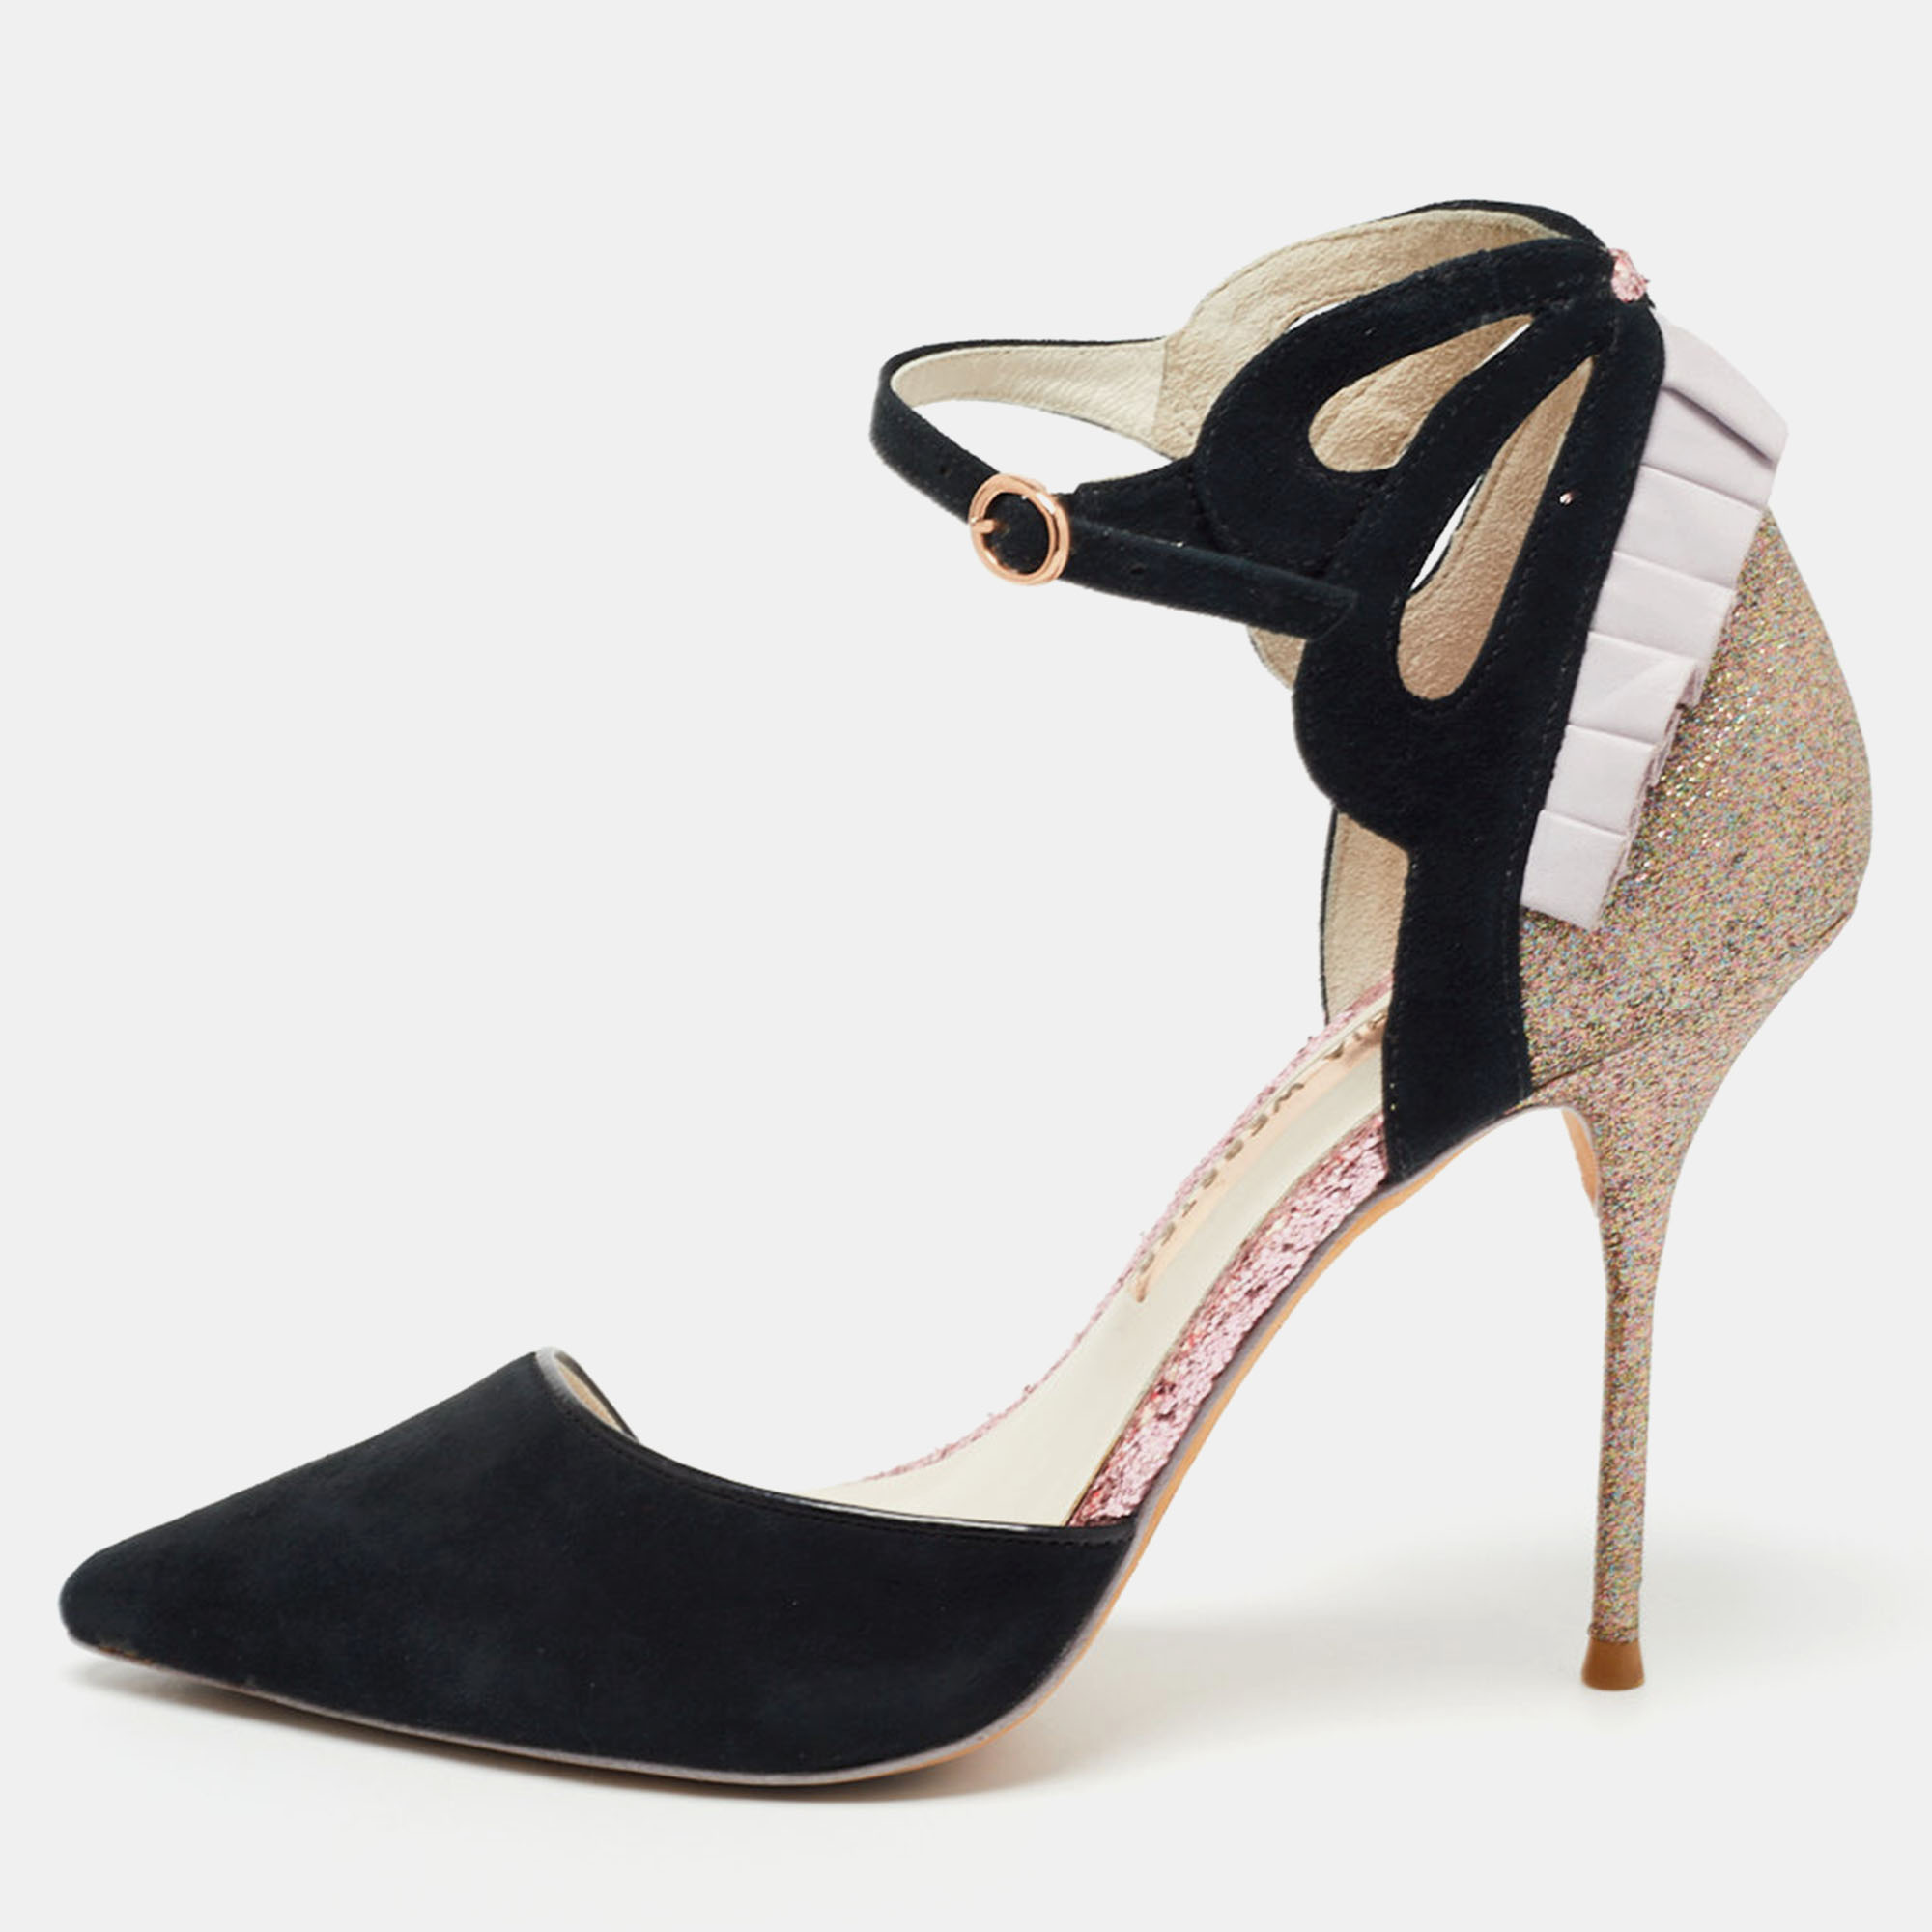 Pre-owned Sophia Webster Black/metallic Suede And Glitter D'orsay Ankle Strap Pumps Size 37